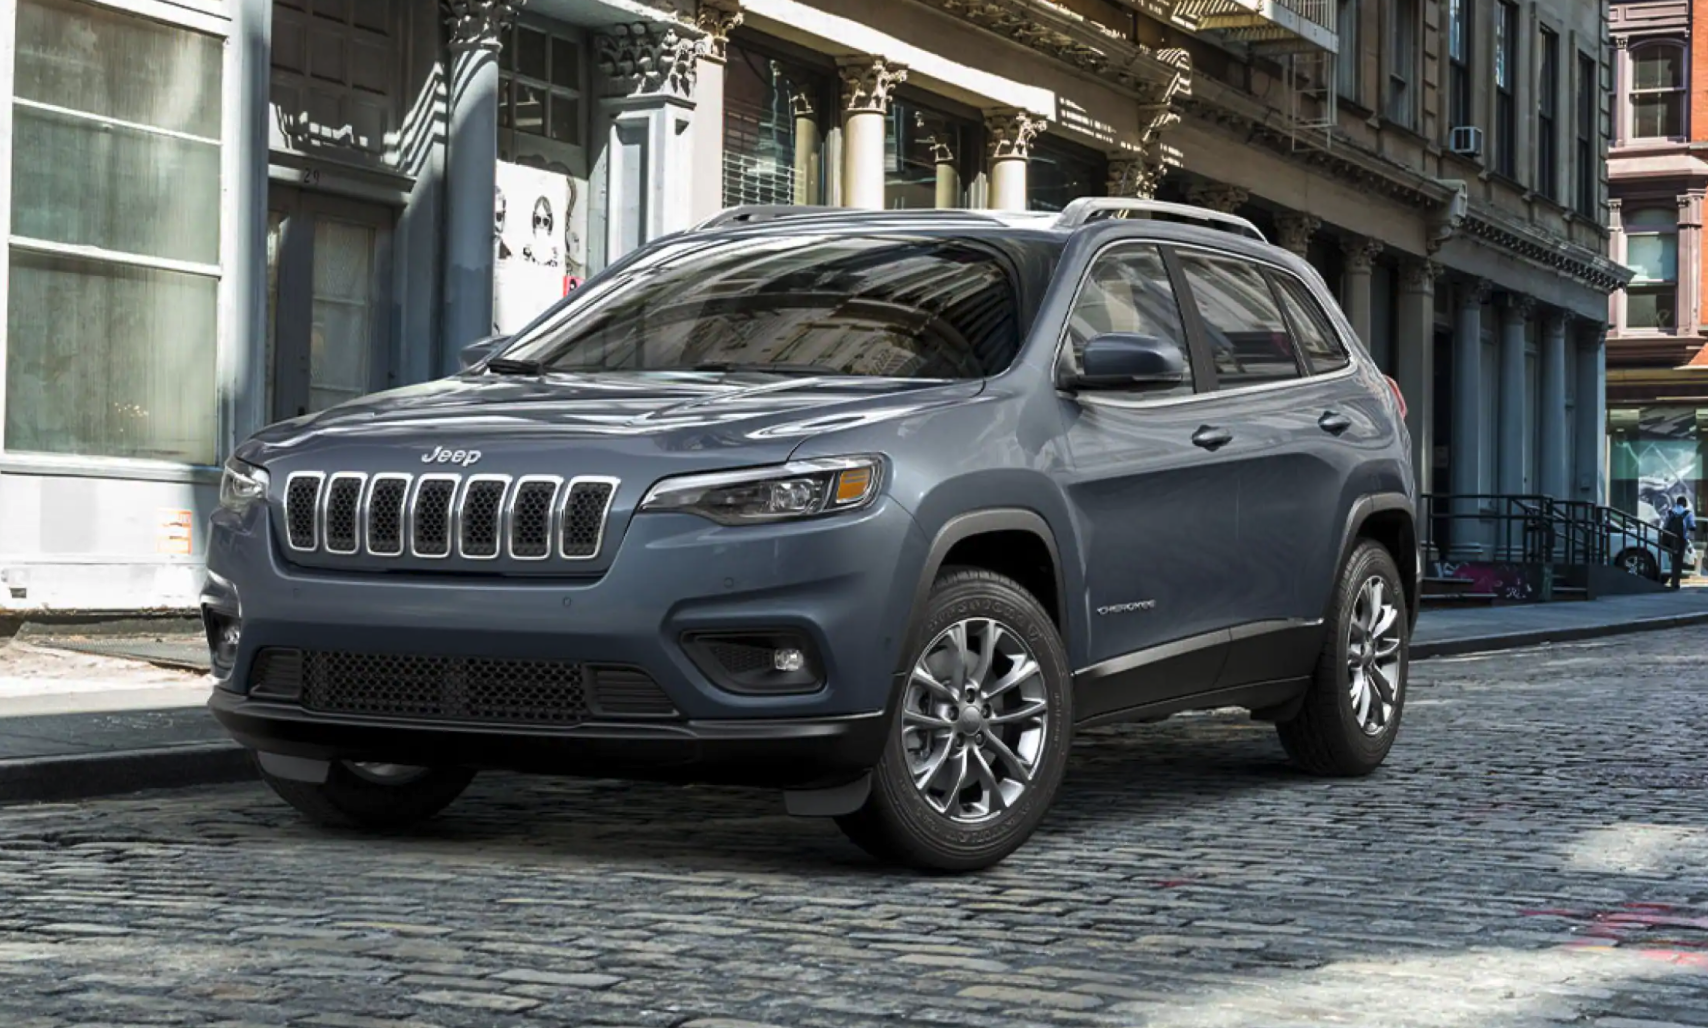 The 2021 Jeep Cherokee parked on the street